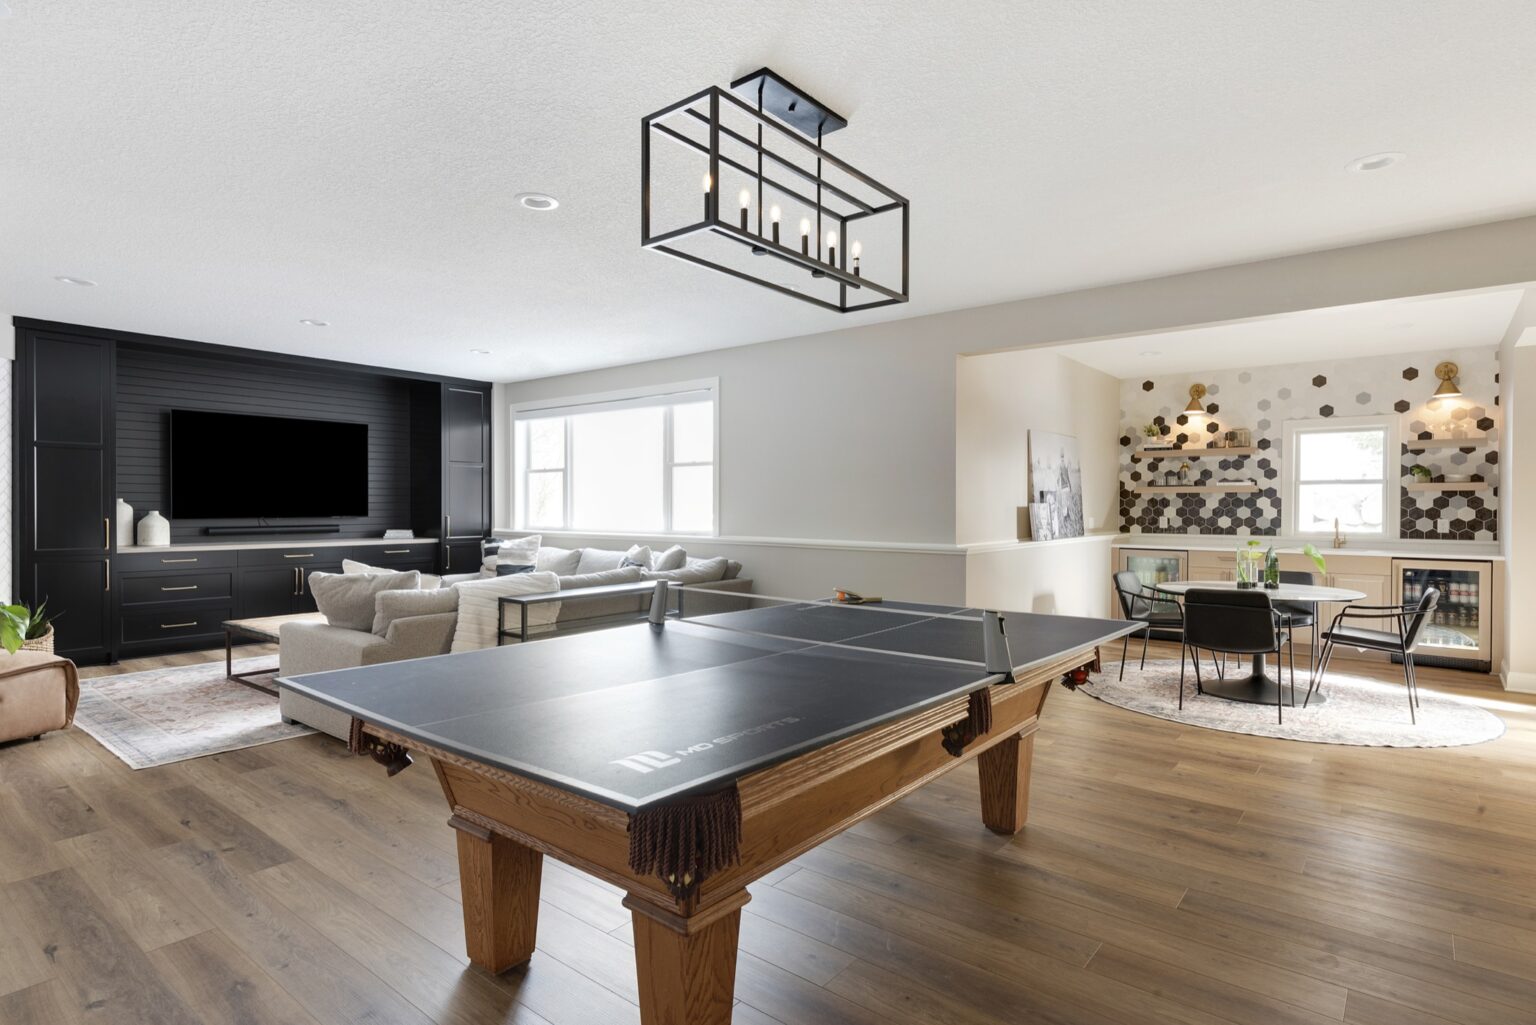 Rosemount lower level remodel with pool table and entertainment center